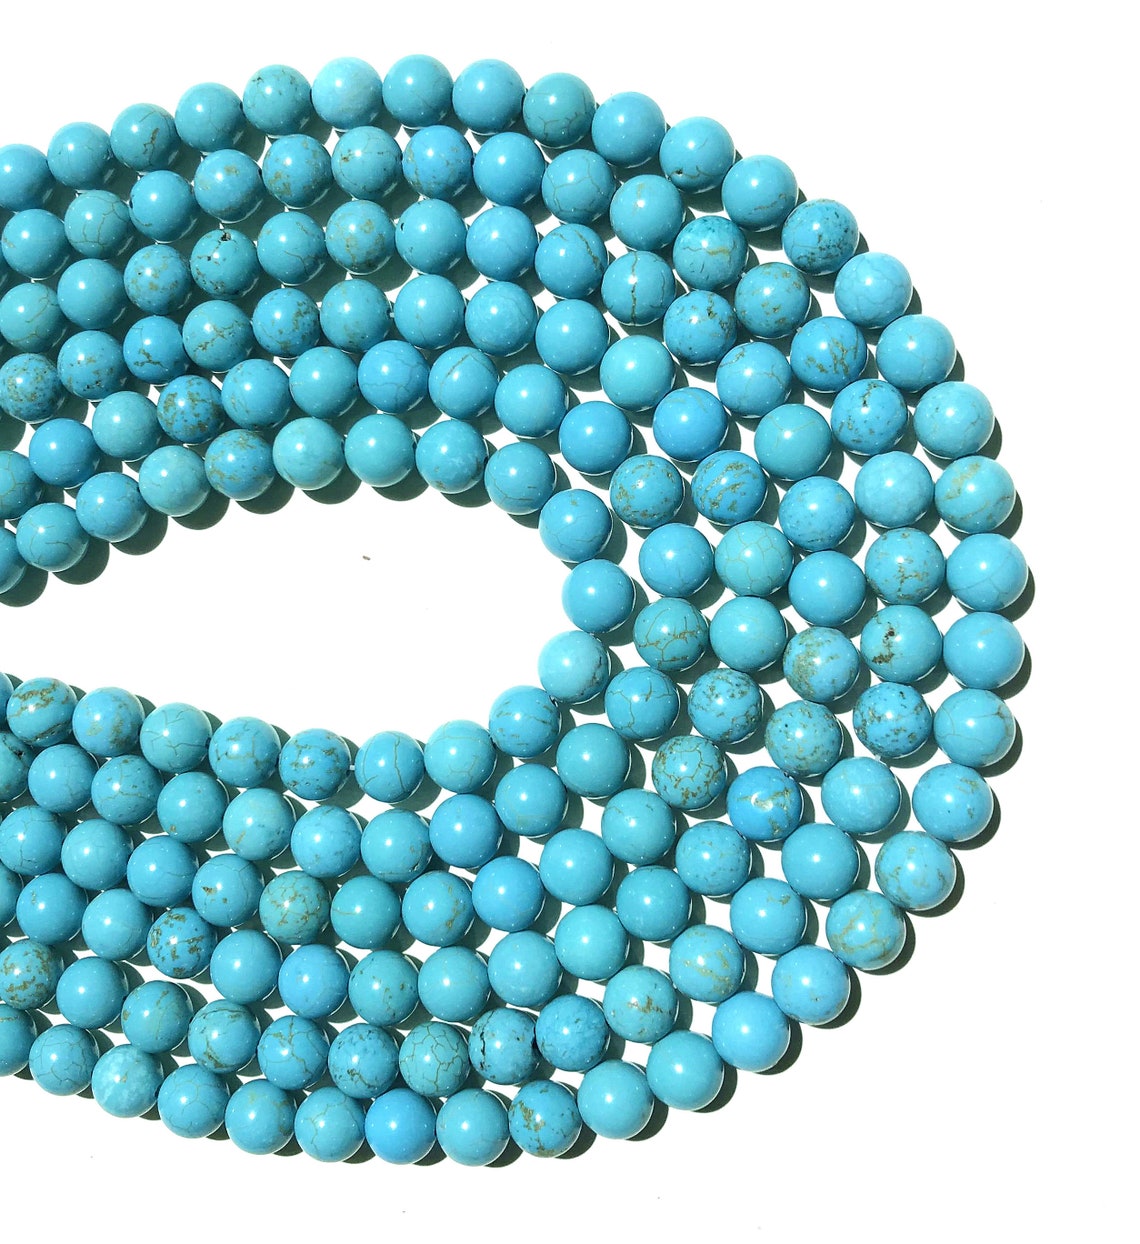 Natural Blue Turquoise Beads 4mm 6mm 8mm 10mm 12mm Round Loose Etsy